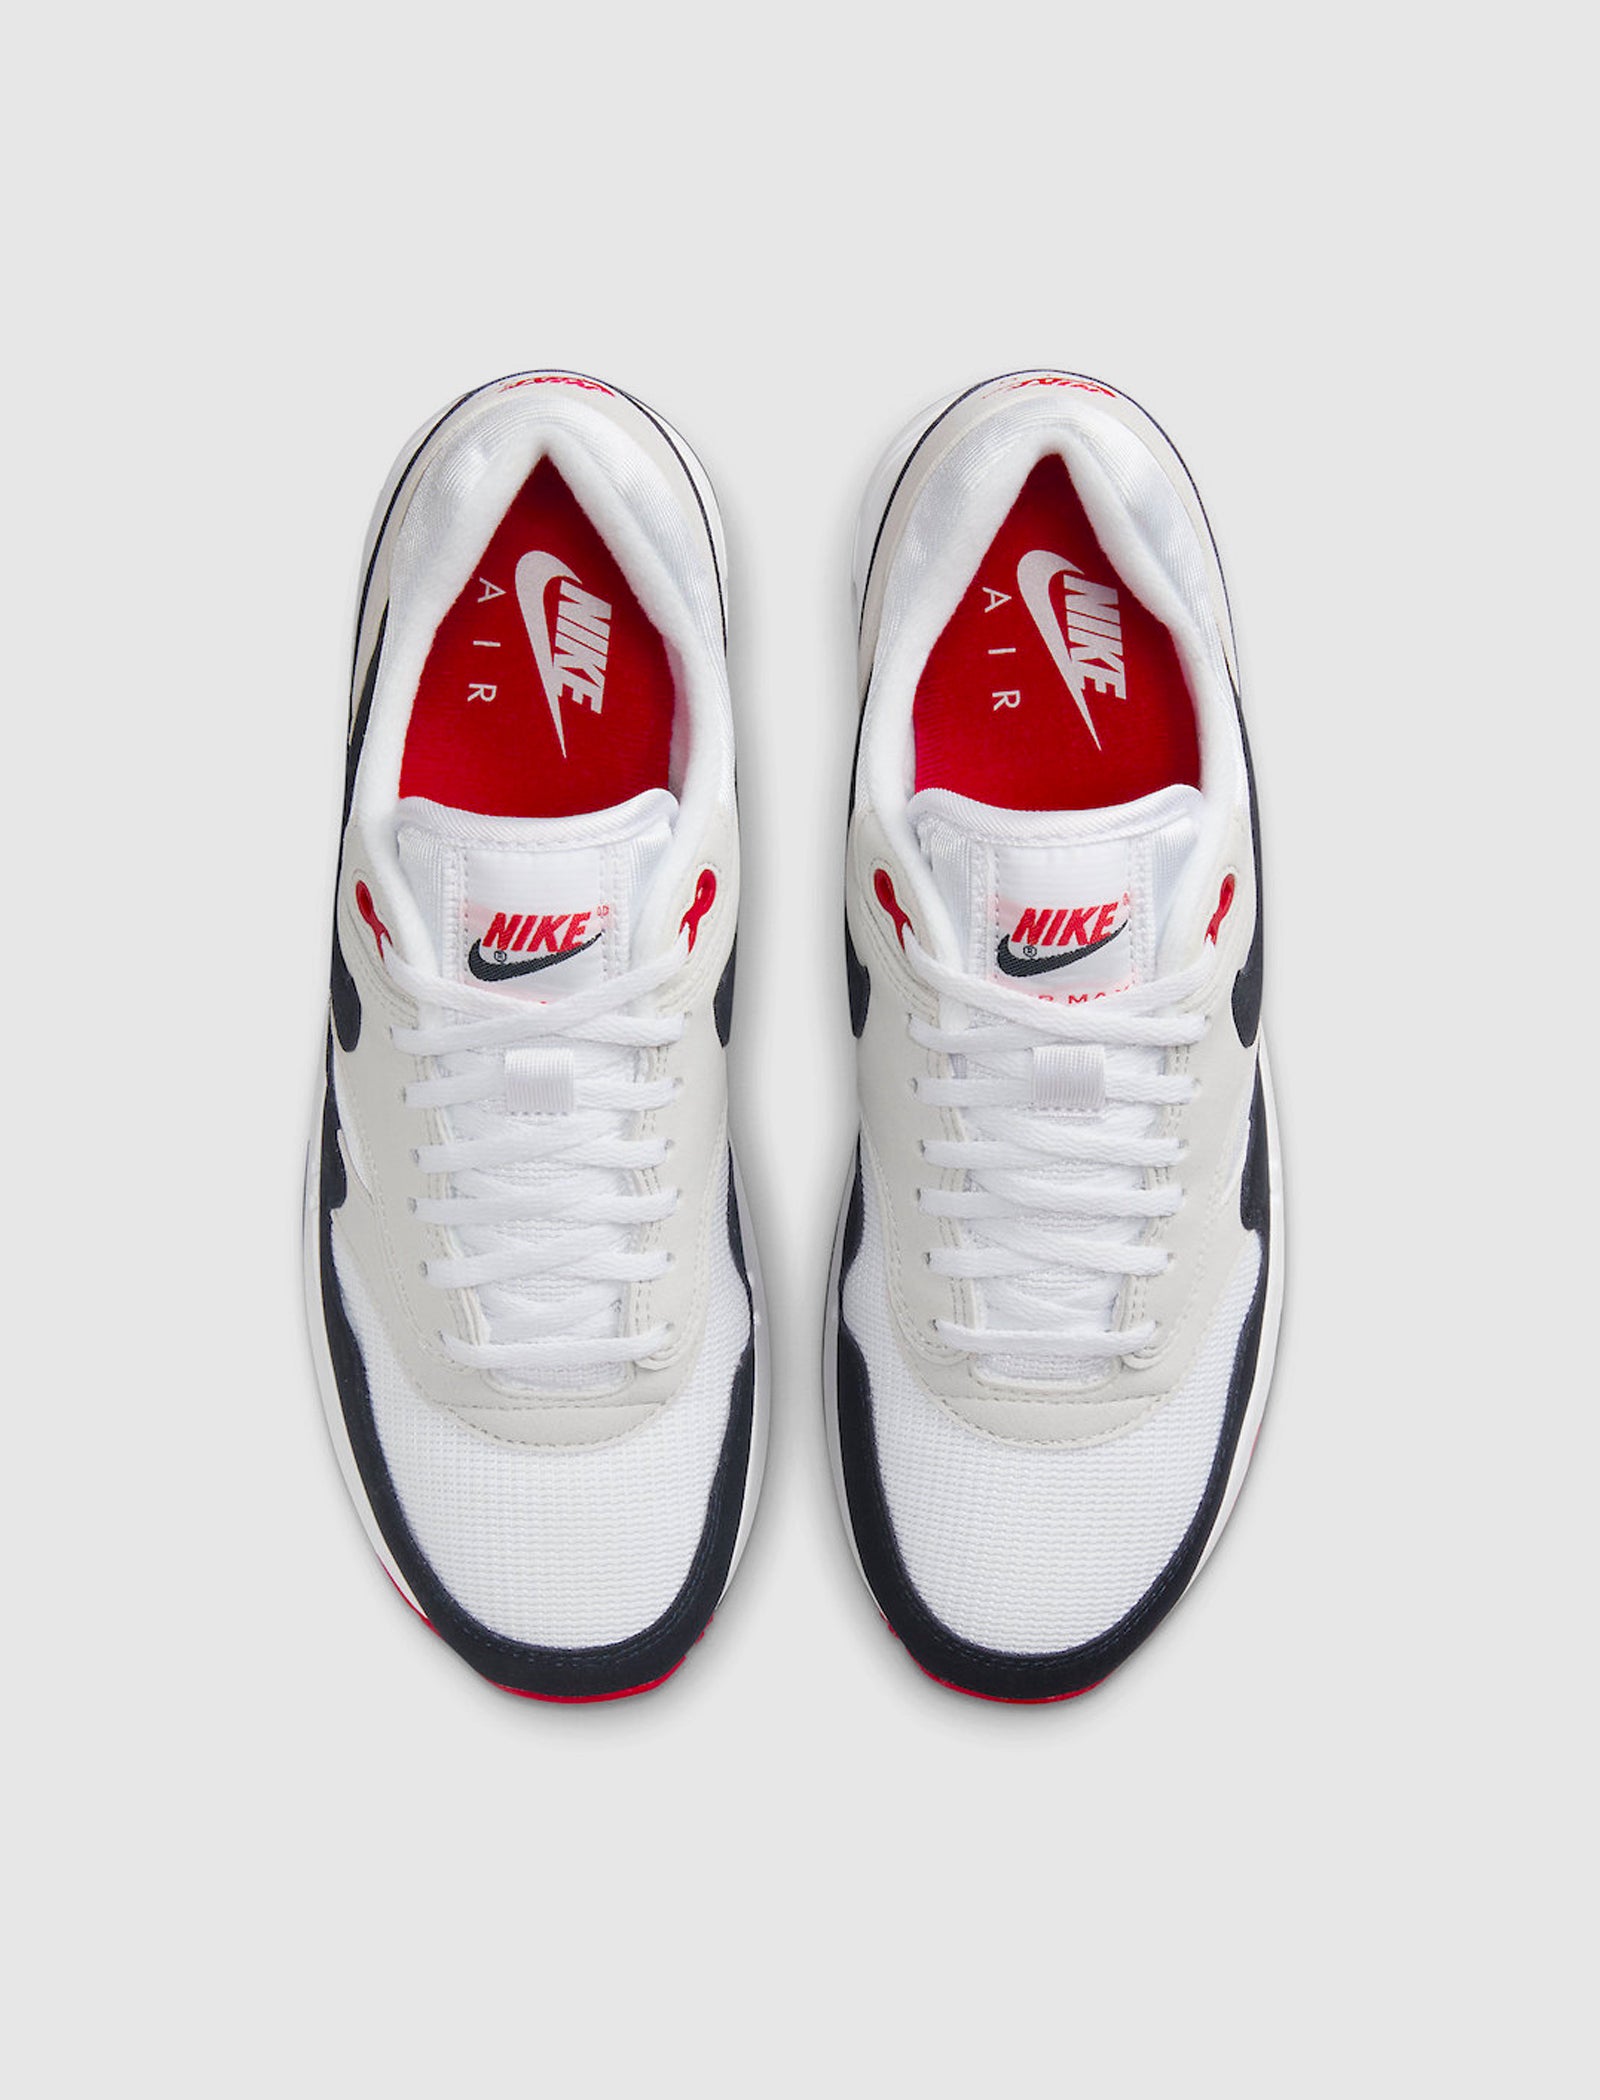 AIR MAX 1 PRM '86 OG BIG BUBBLE "SPORT RED/WHITE"